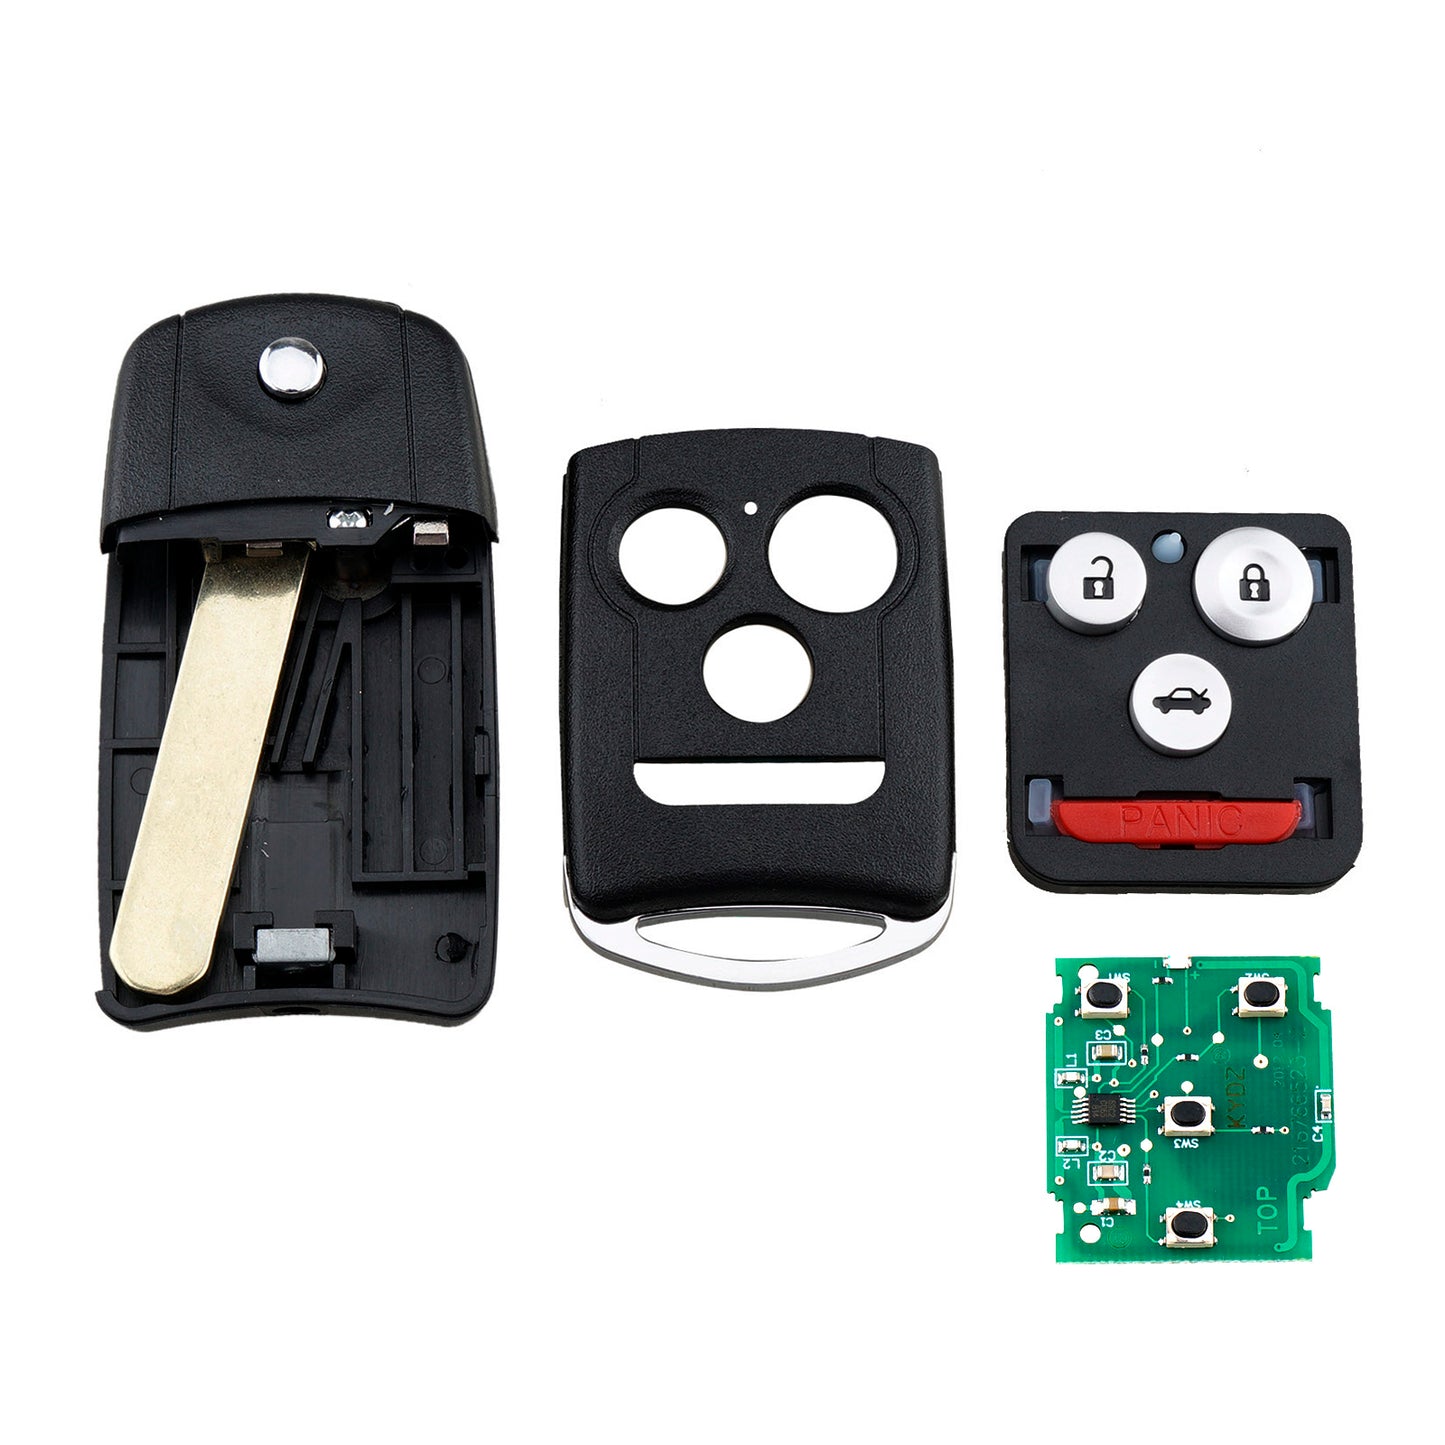 4 Buttons 313.8MHz Keyless Entry Fob Remote Car Key For 2007-2008 Acura TL FCC ID:OUCG8D-439H-A SKU : J260